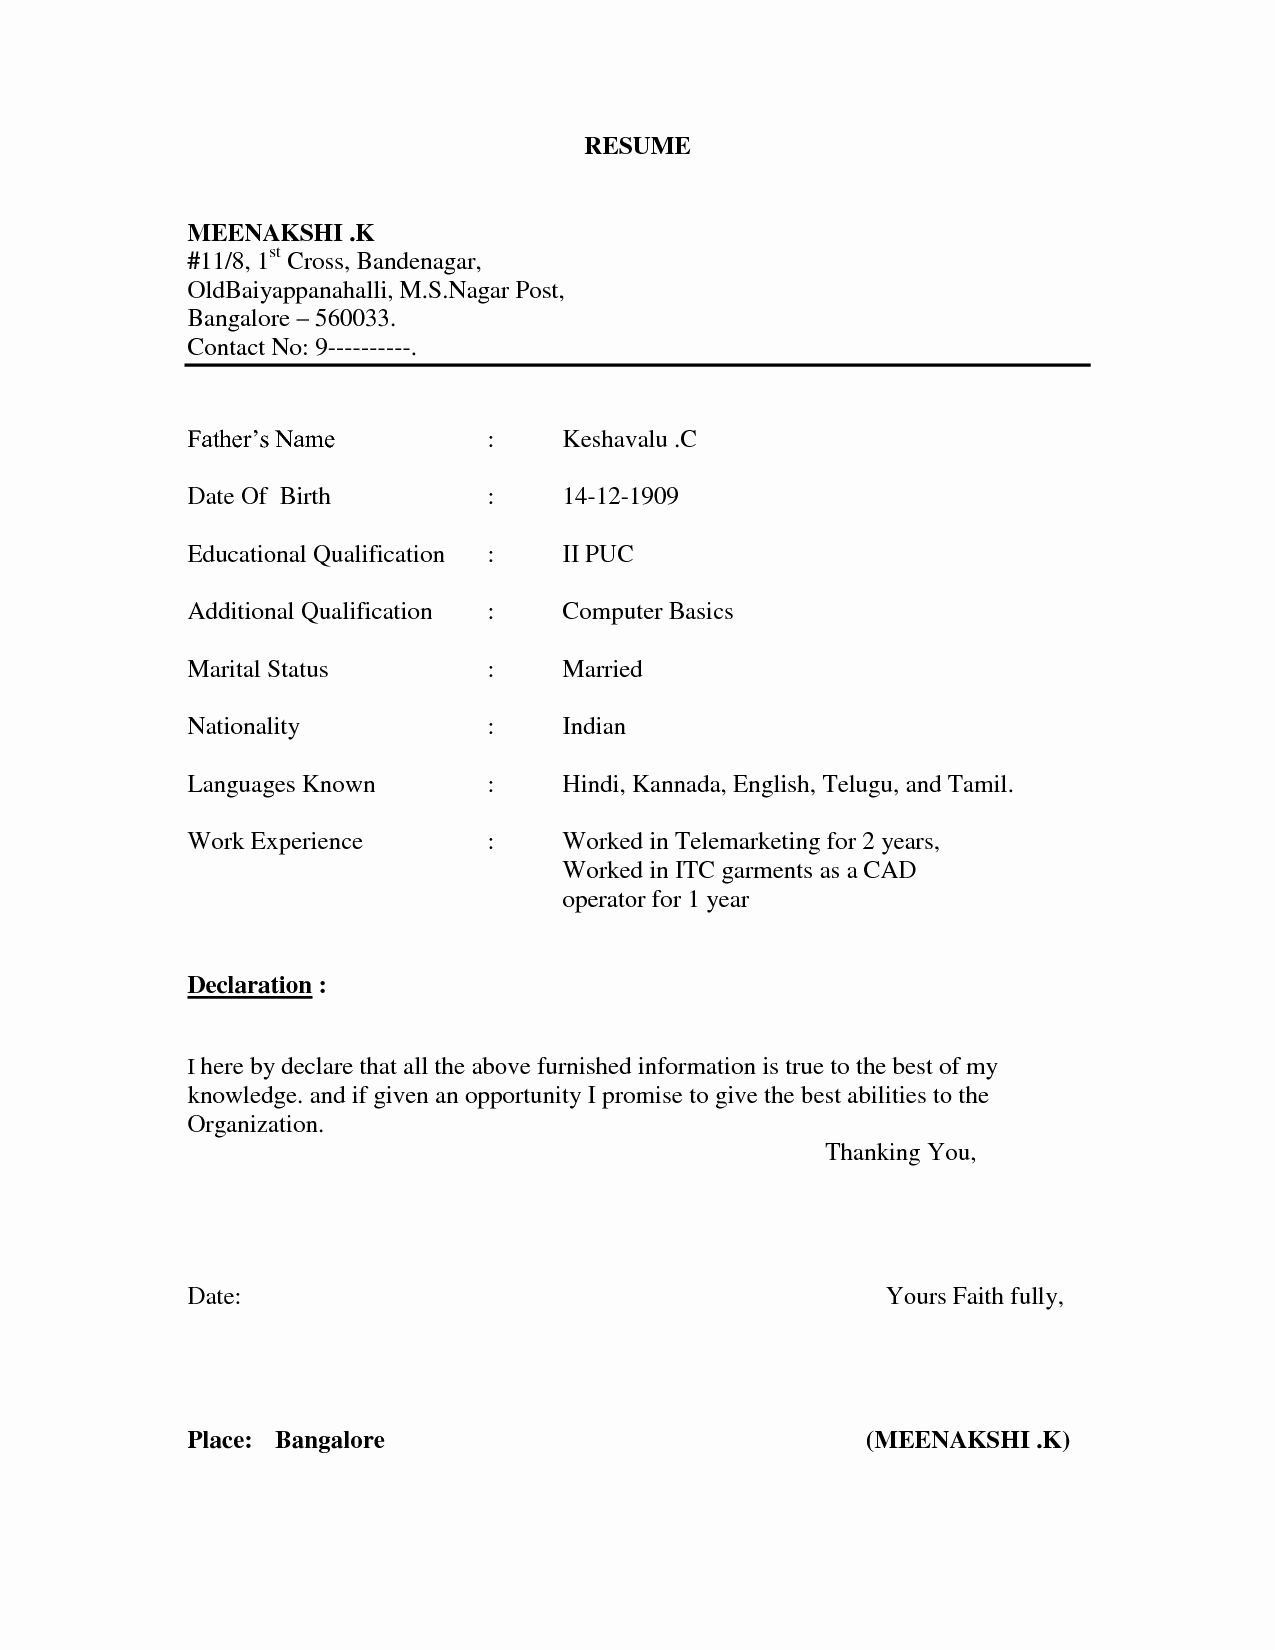 Sample Resume In Word format Awesome Resume format Doc File Download Resume format Doc File